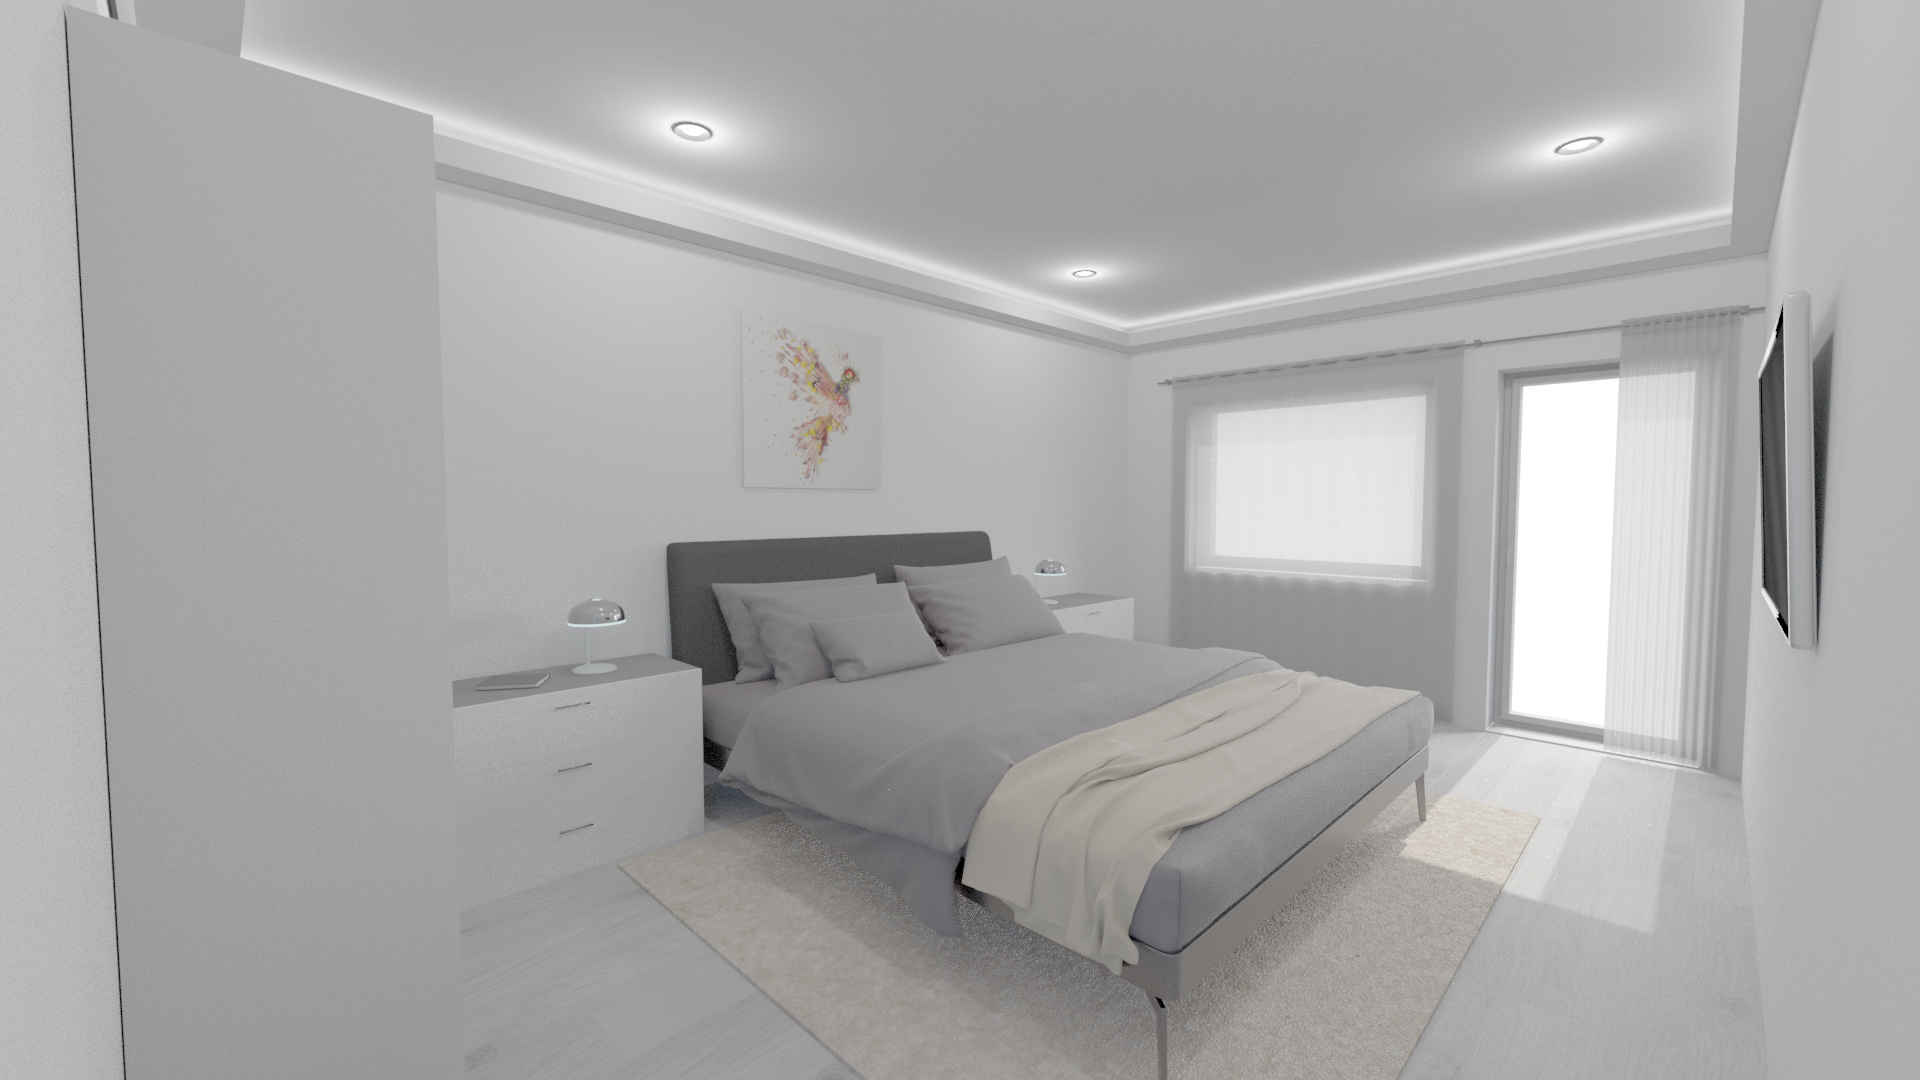 Natural Lighting Inside A Room Lighting And Rendering